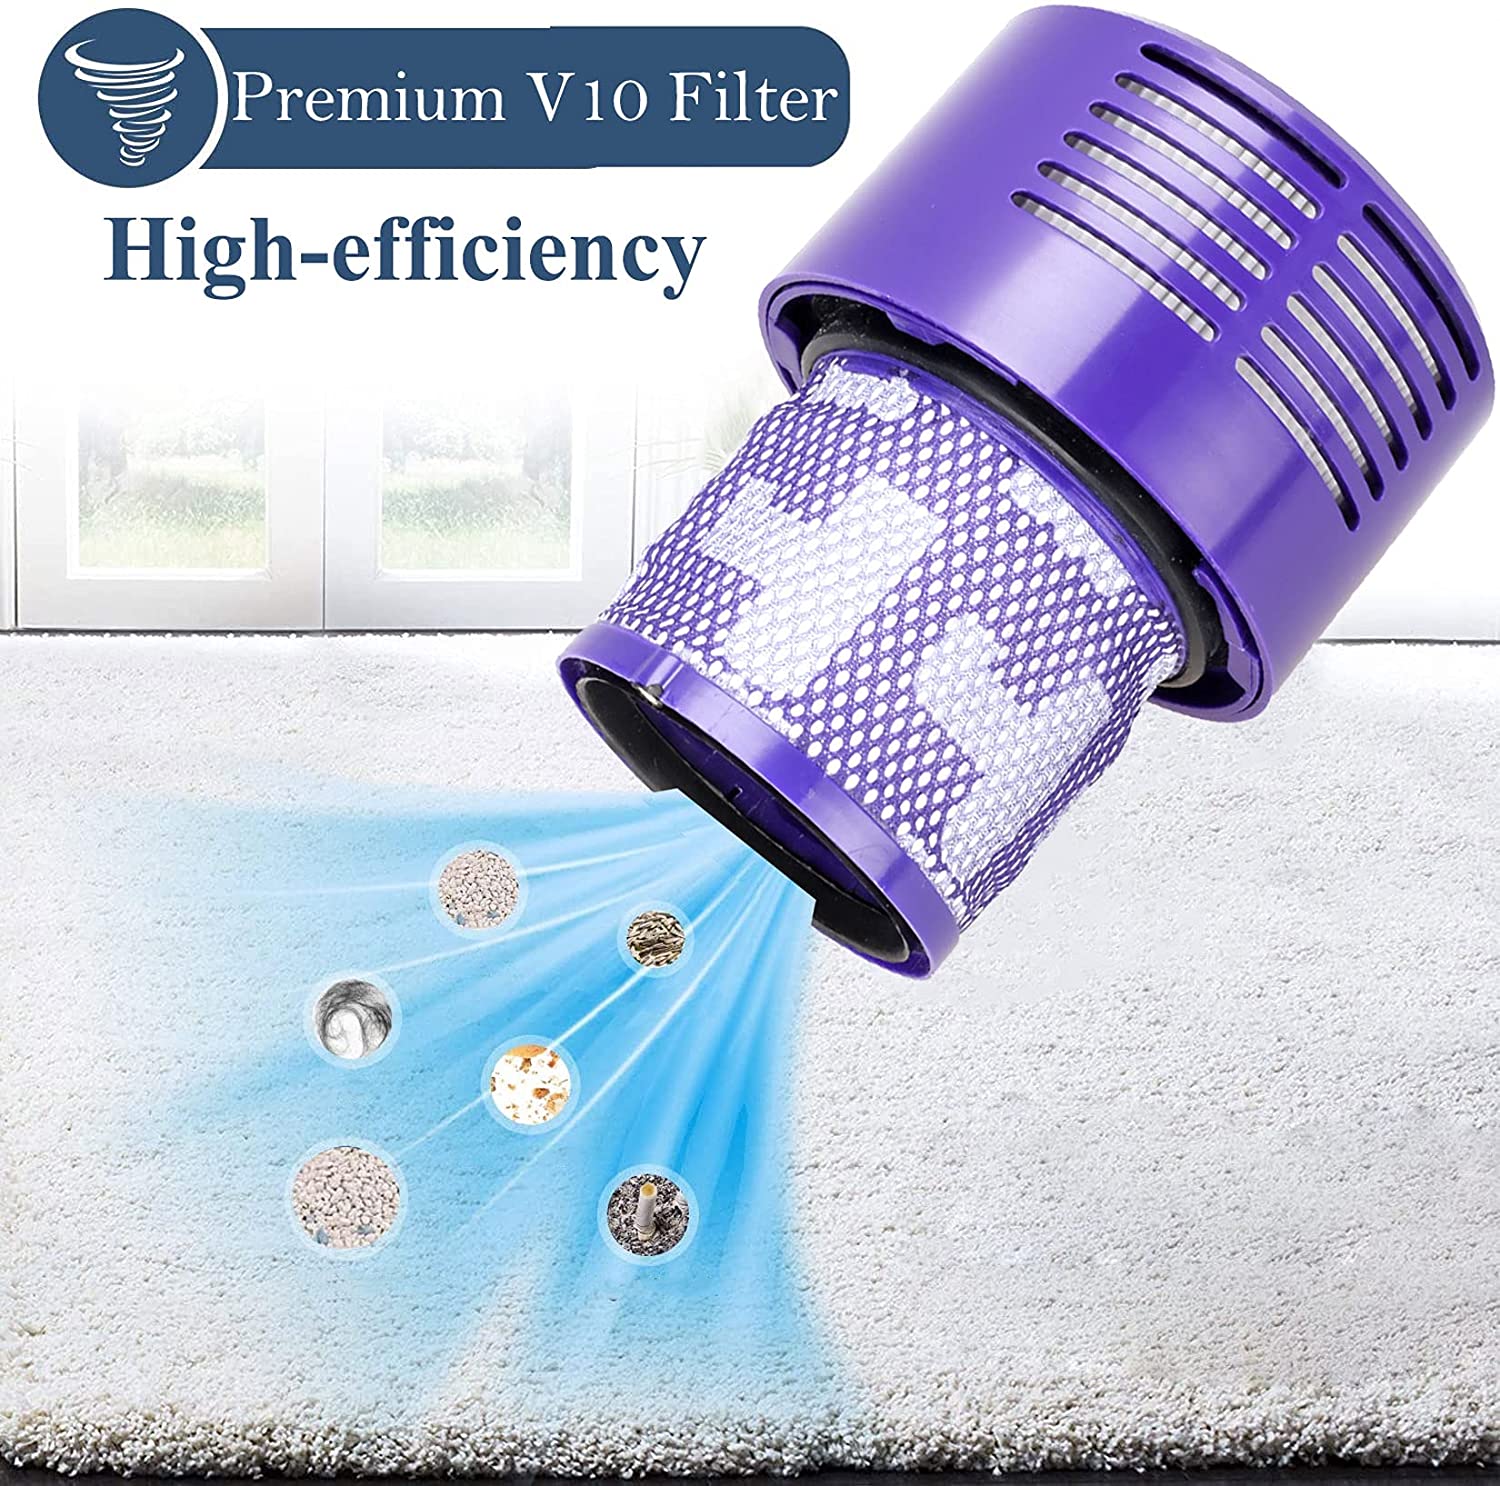 Replacement V10 Filters for Dyson V10 Cyclone Series, V10 Absolute, V10 Animal, V10 # 969082-01